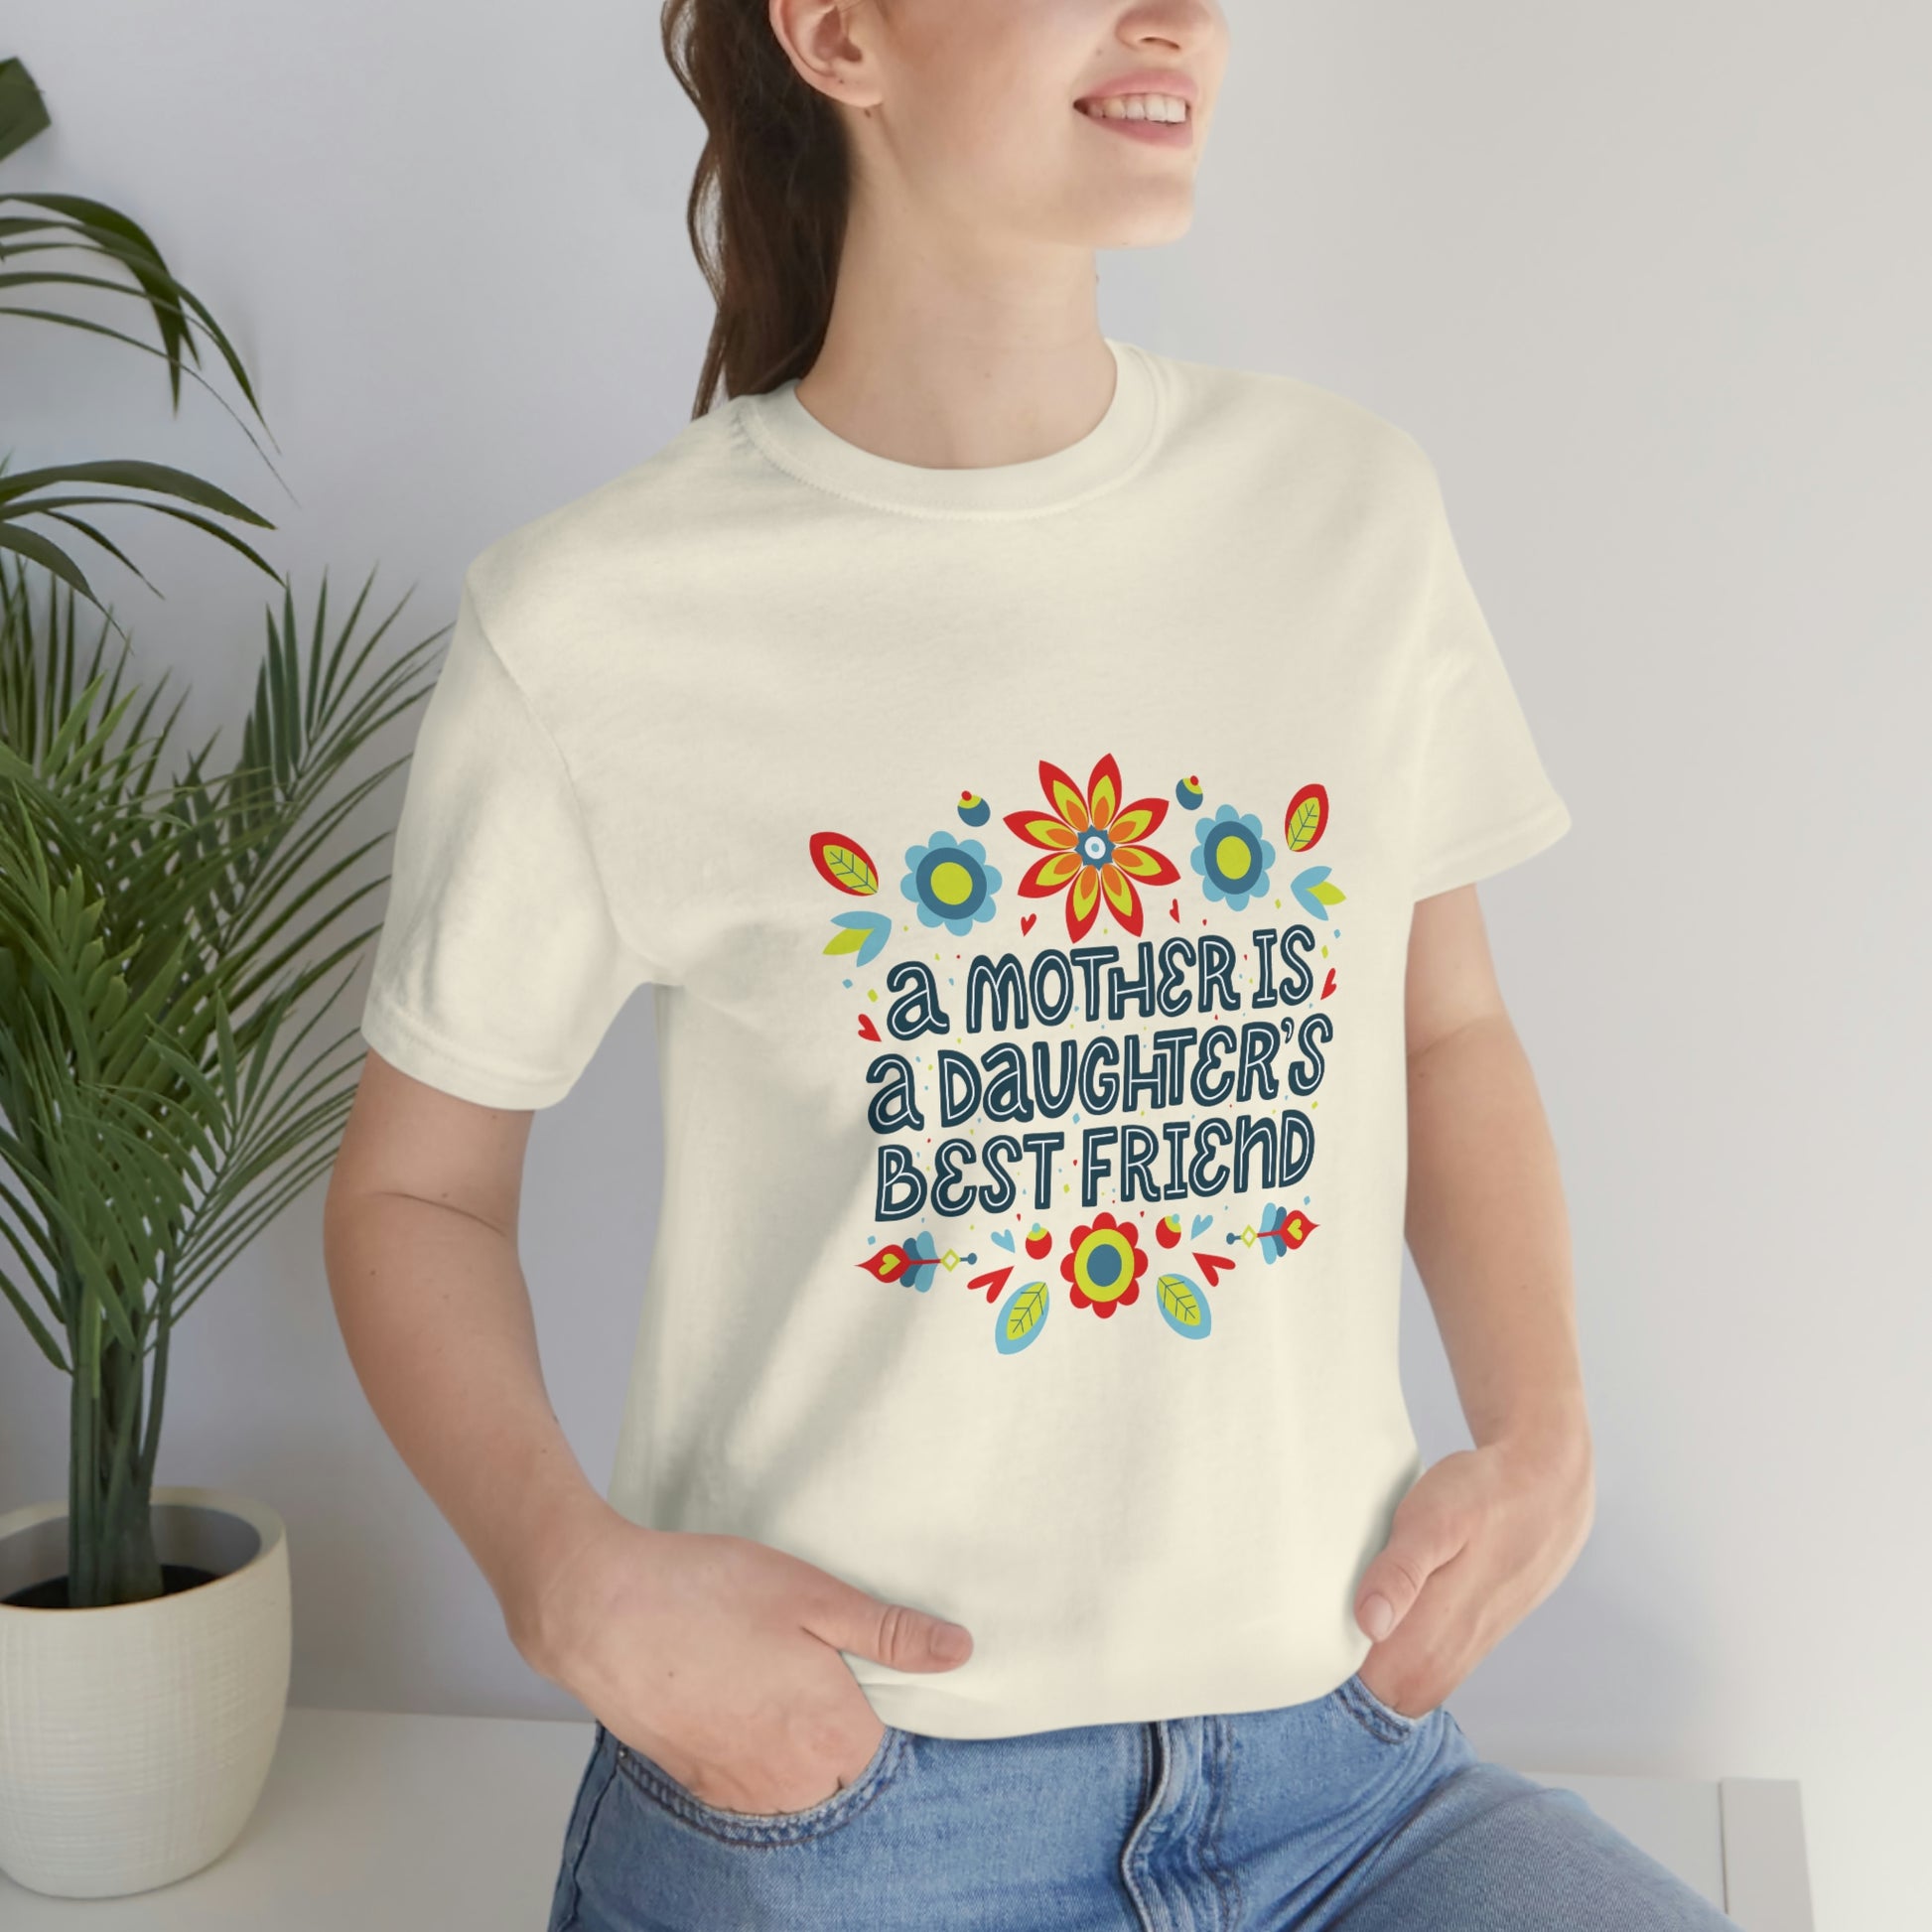 Show your gratitude for mom with this natural colored  Best Friend Mom and Daughter T-Shirt. Perfect gift for mom.